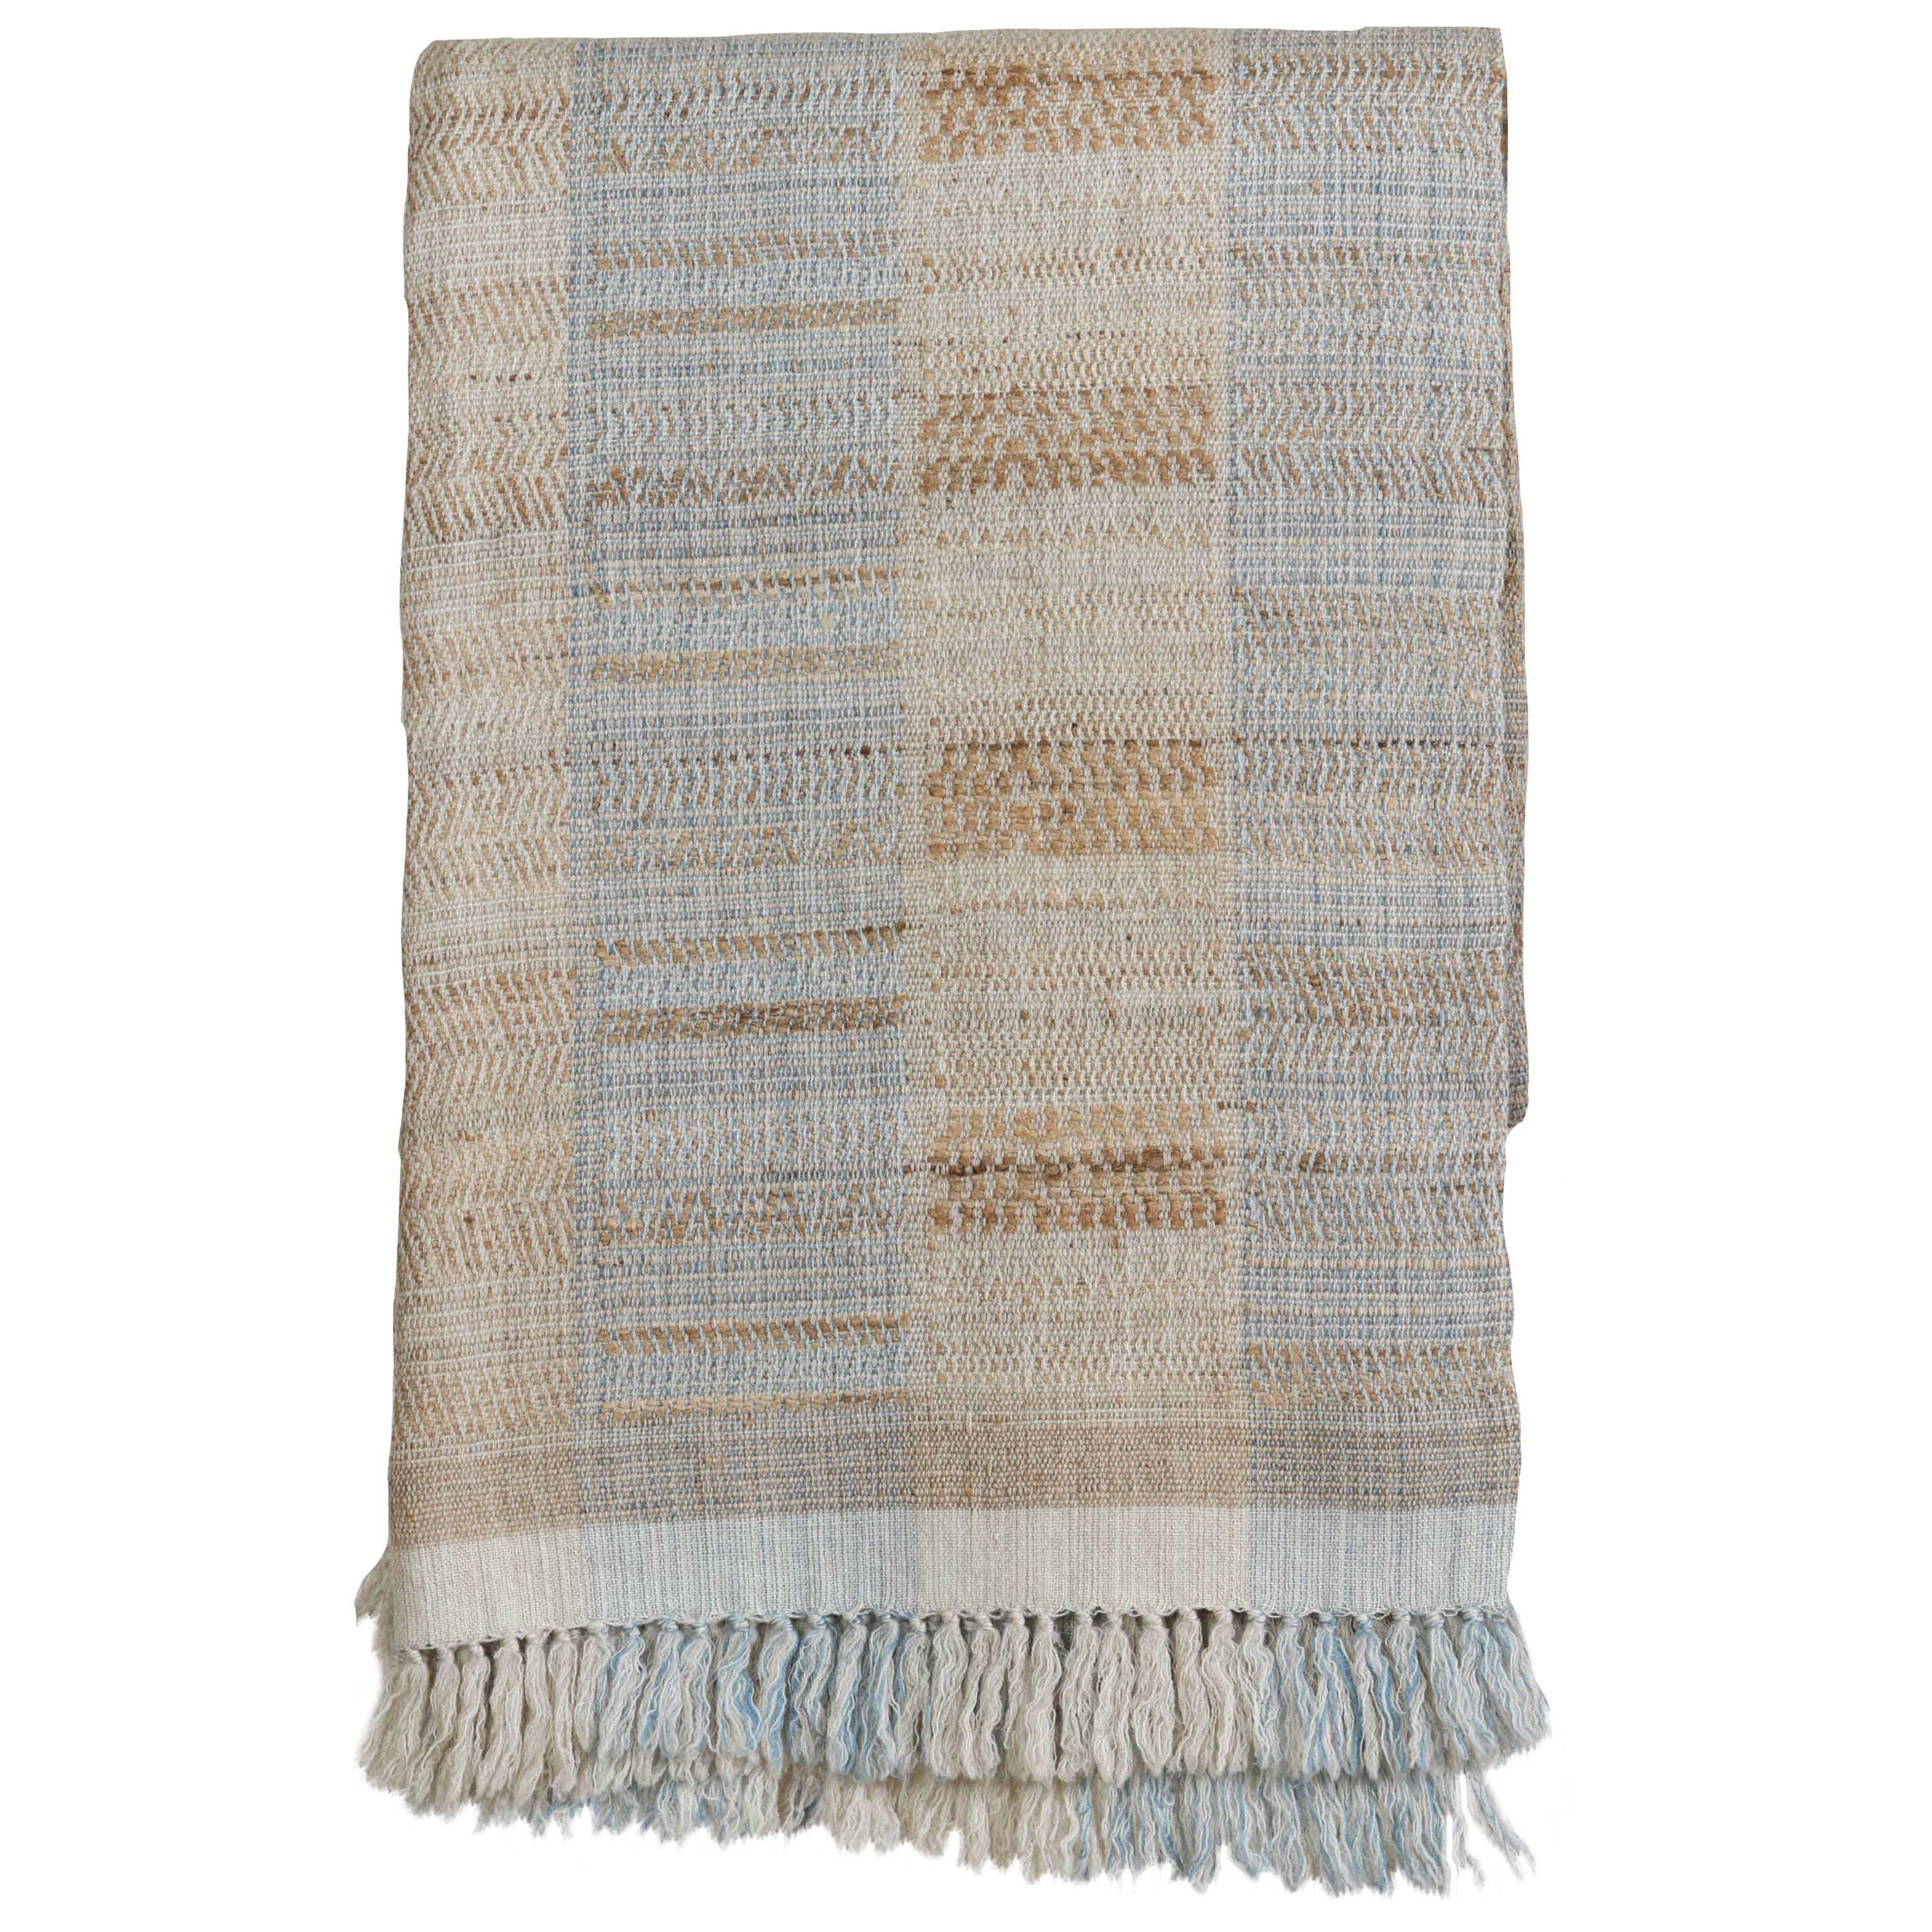 Indian Handwoven Throw, Light Blue, Beige and Ivory, Wool and Raw Silk For Sale